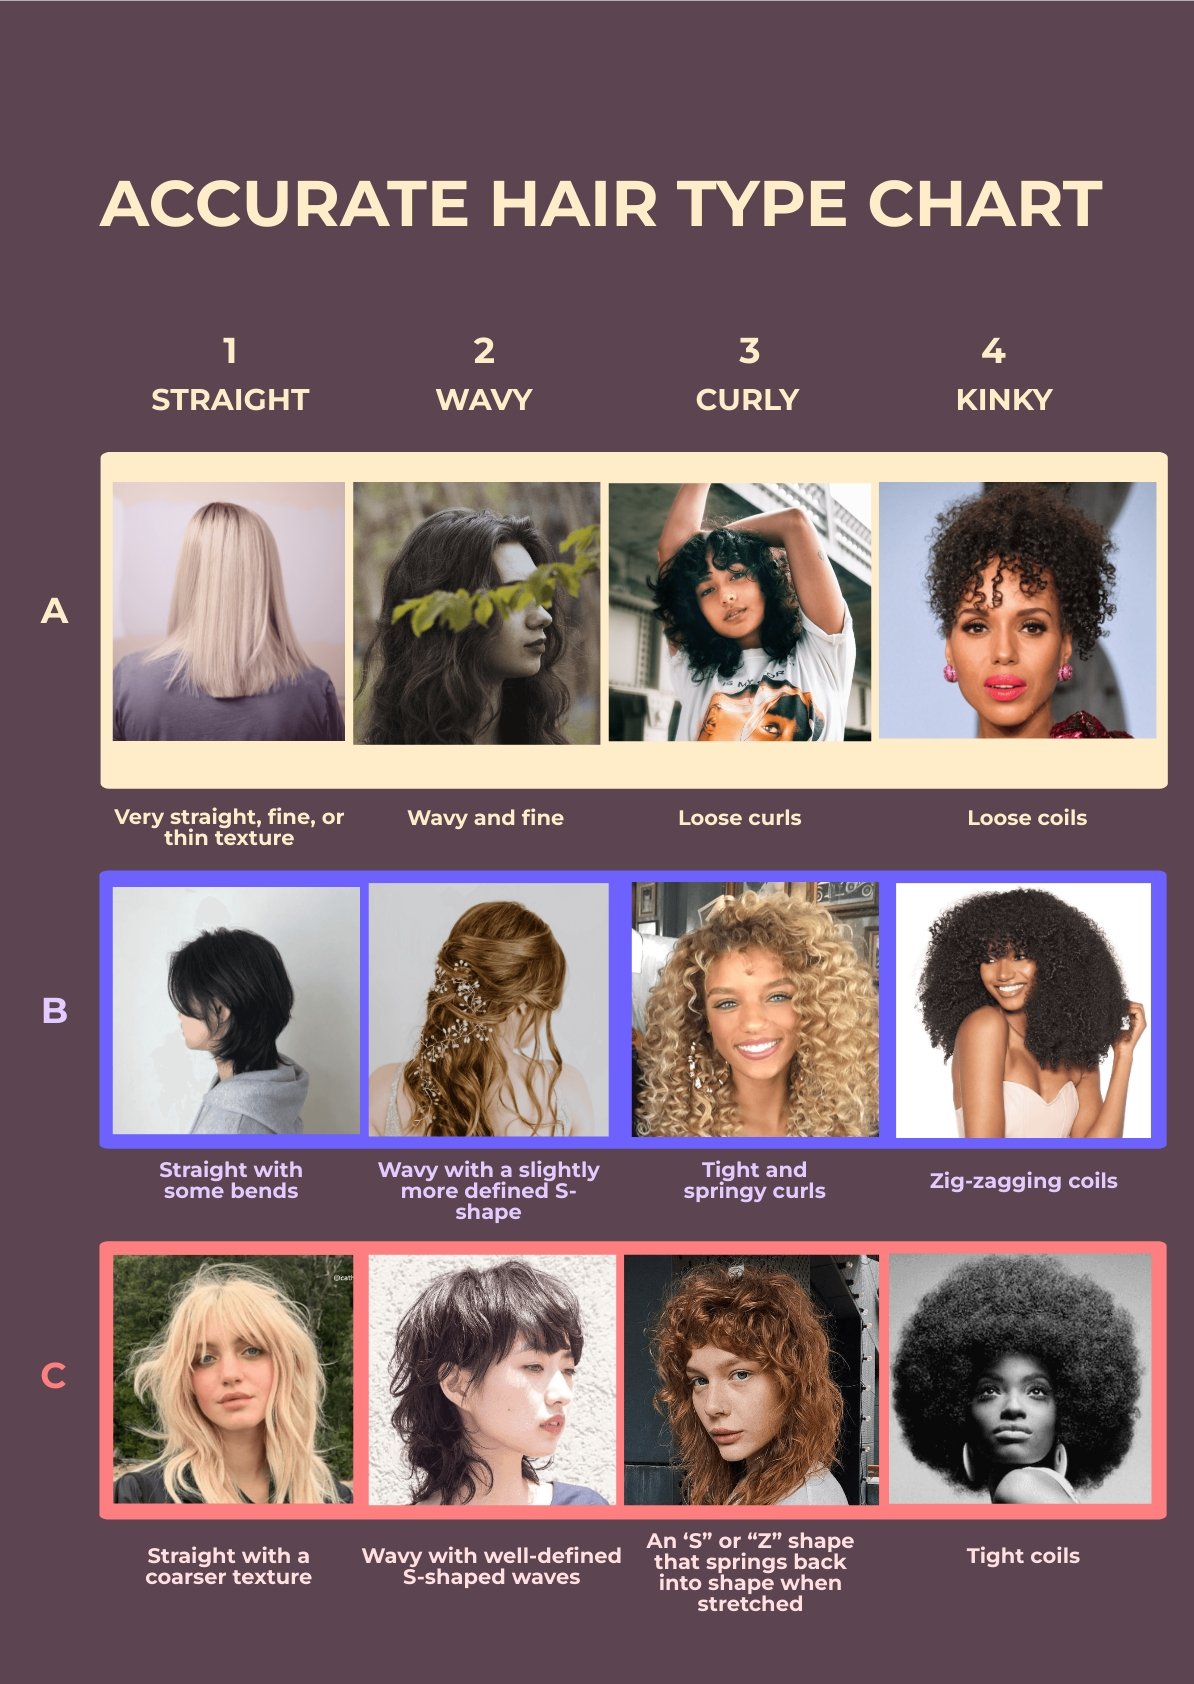 Accurate Hair Type Chart in PDF, Illustrator